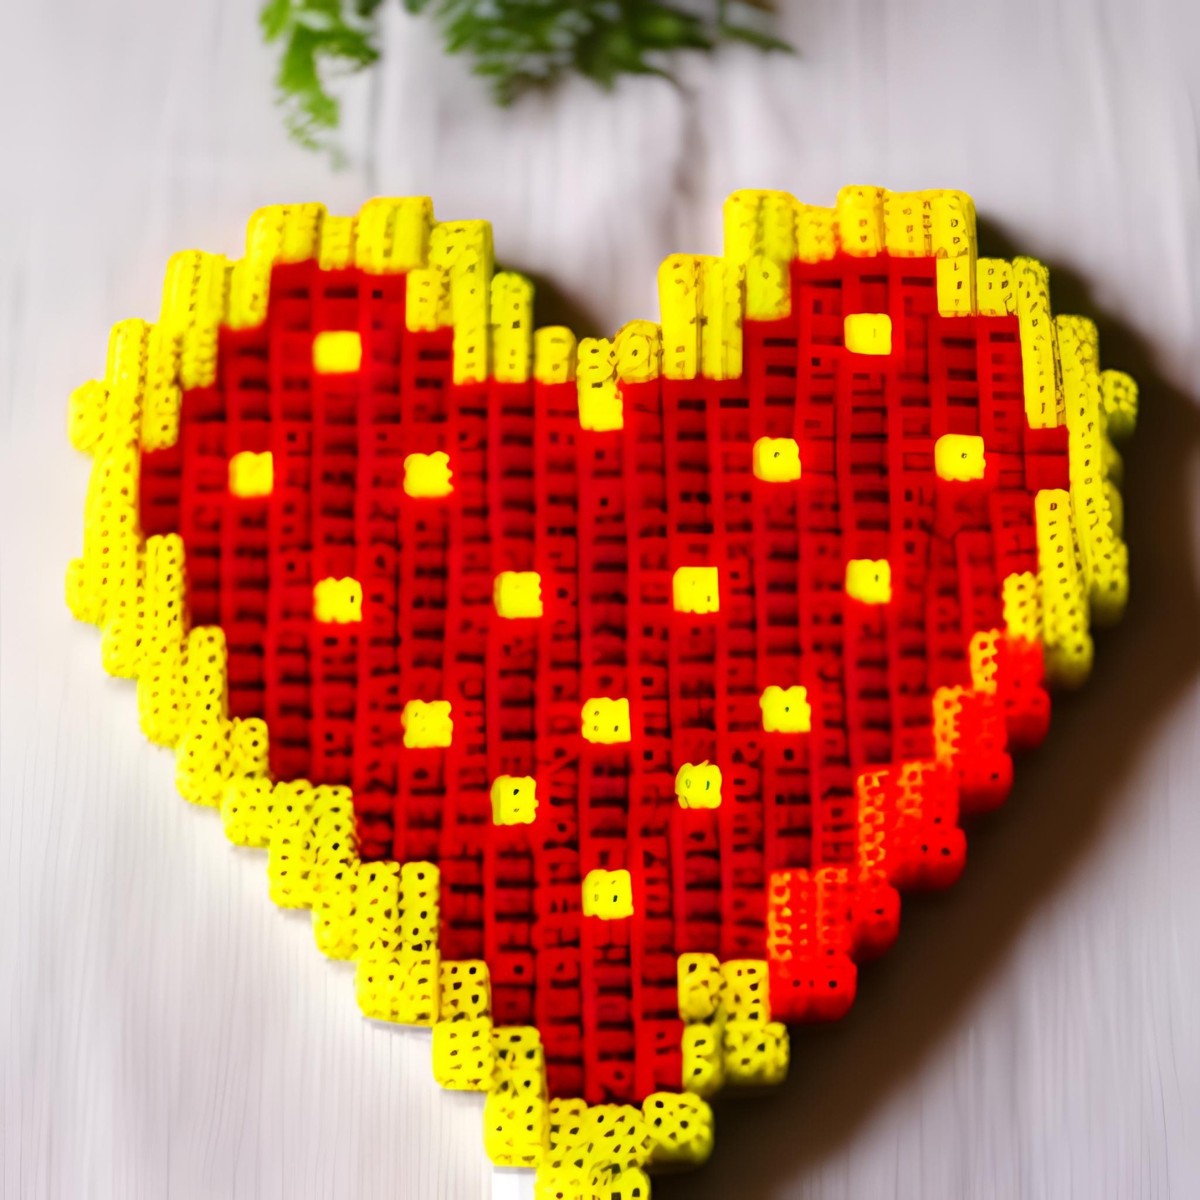 14 Heart Perler Bead Patterns For Showing Love - DIY Crafts